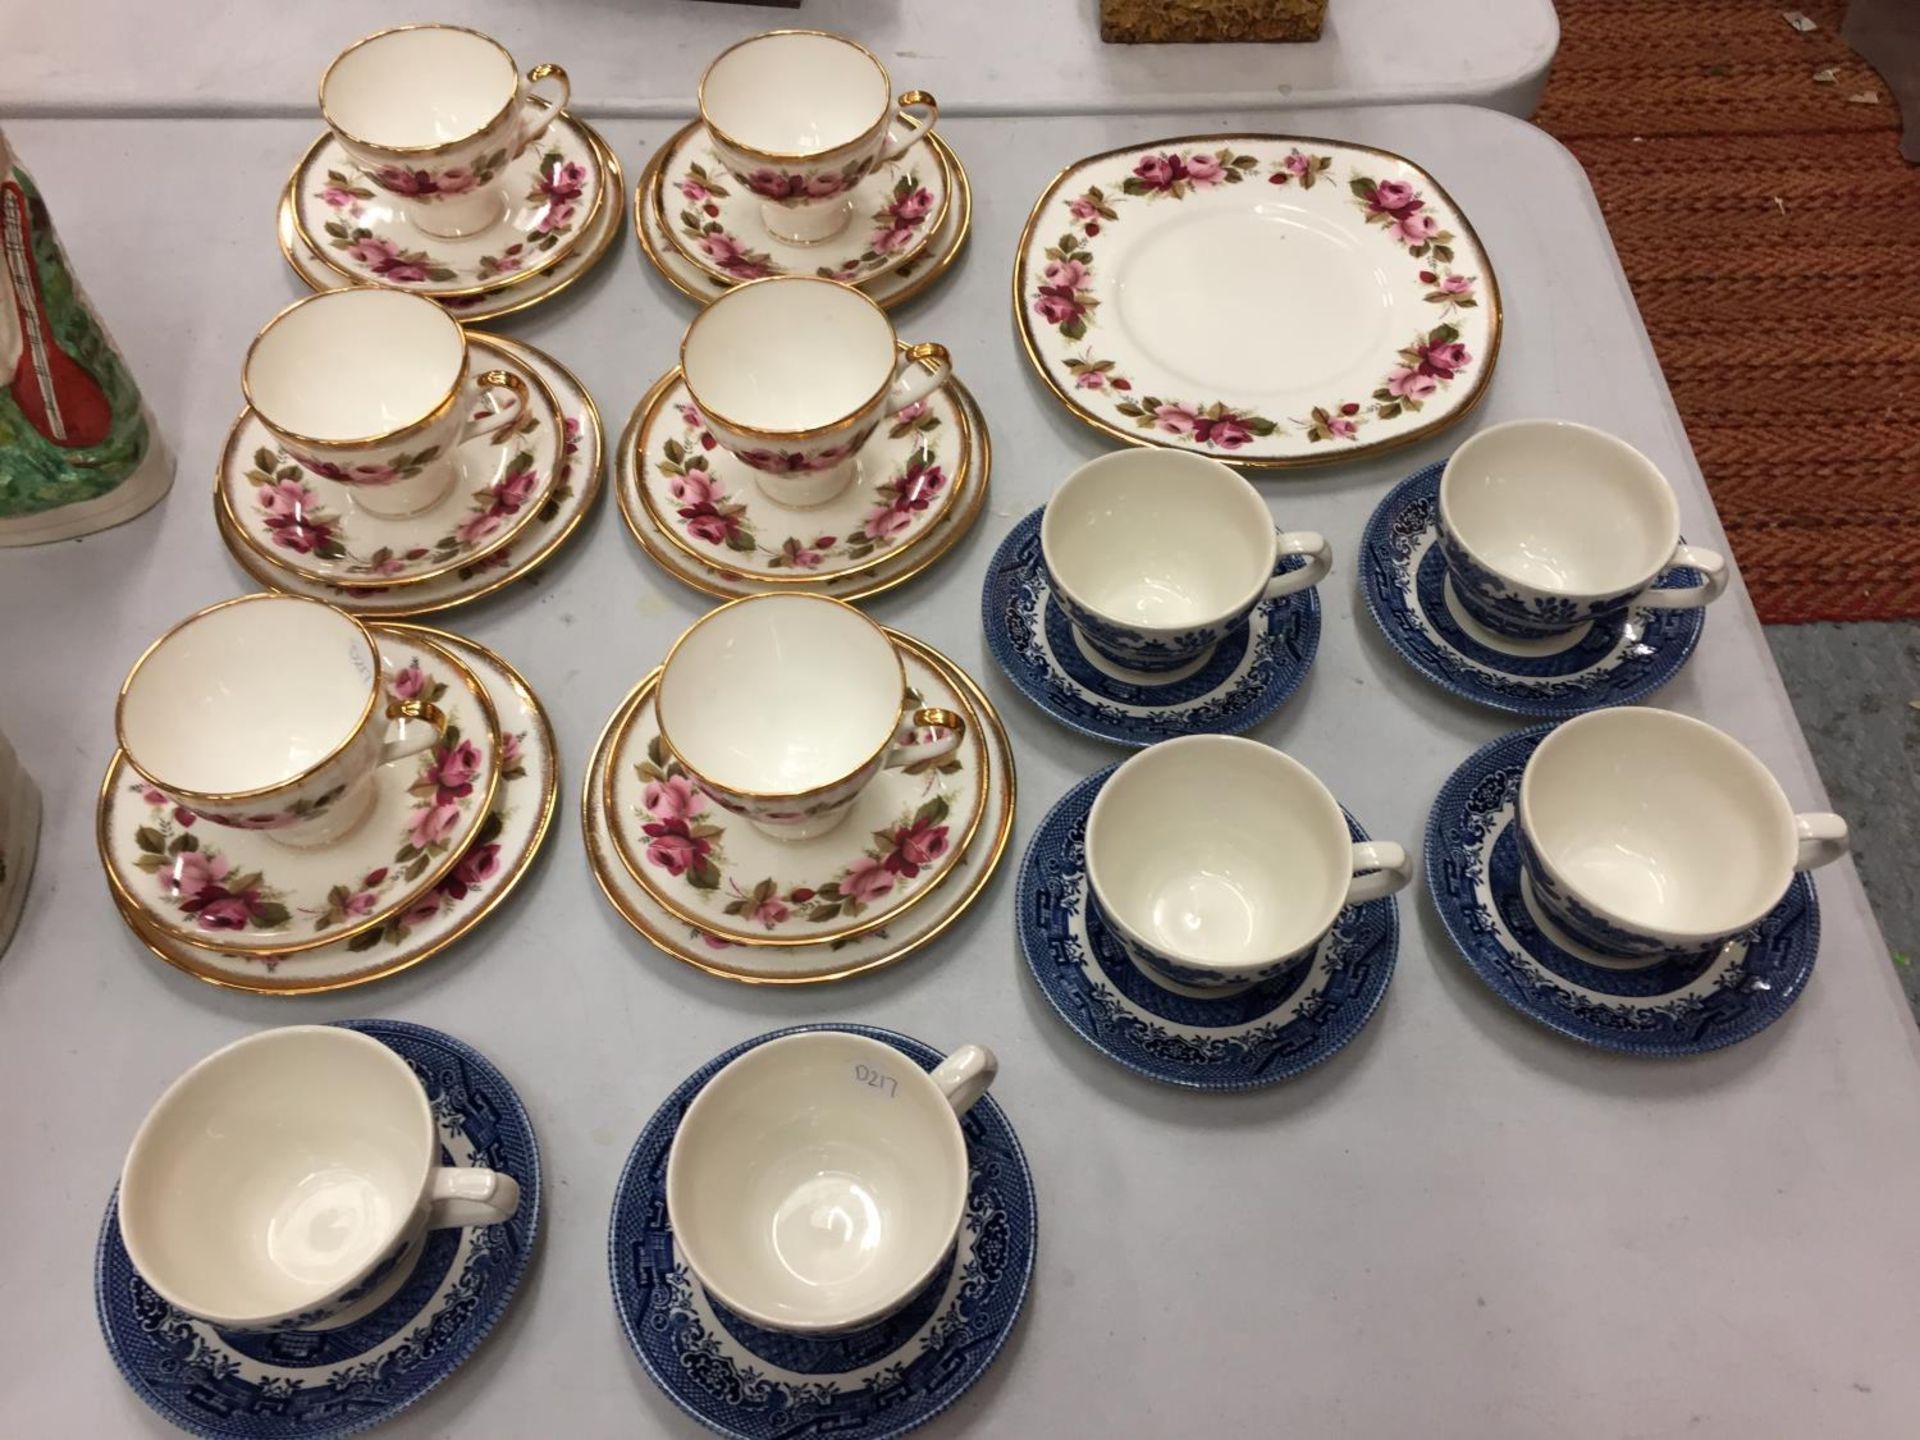 A SET OF SIX ELLIS SYKES FINE BONE CHINA TRIOS AND A SET OF SIX BLUE WILLOW PATTERN CUPS AND SAUCERS